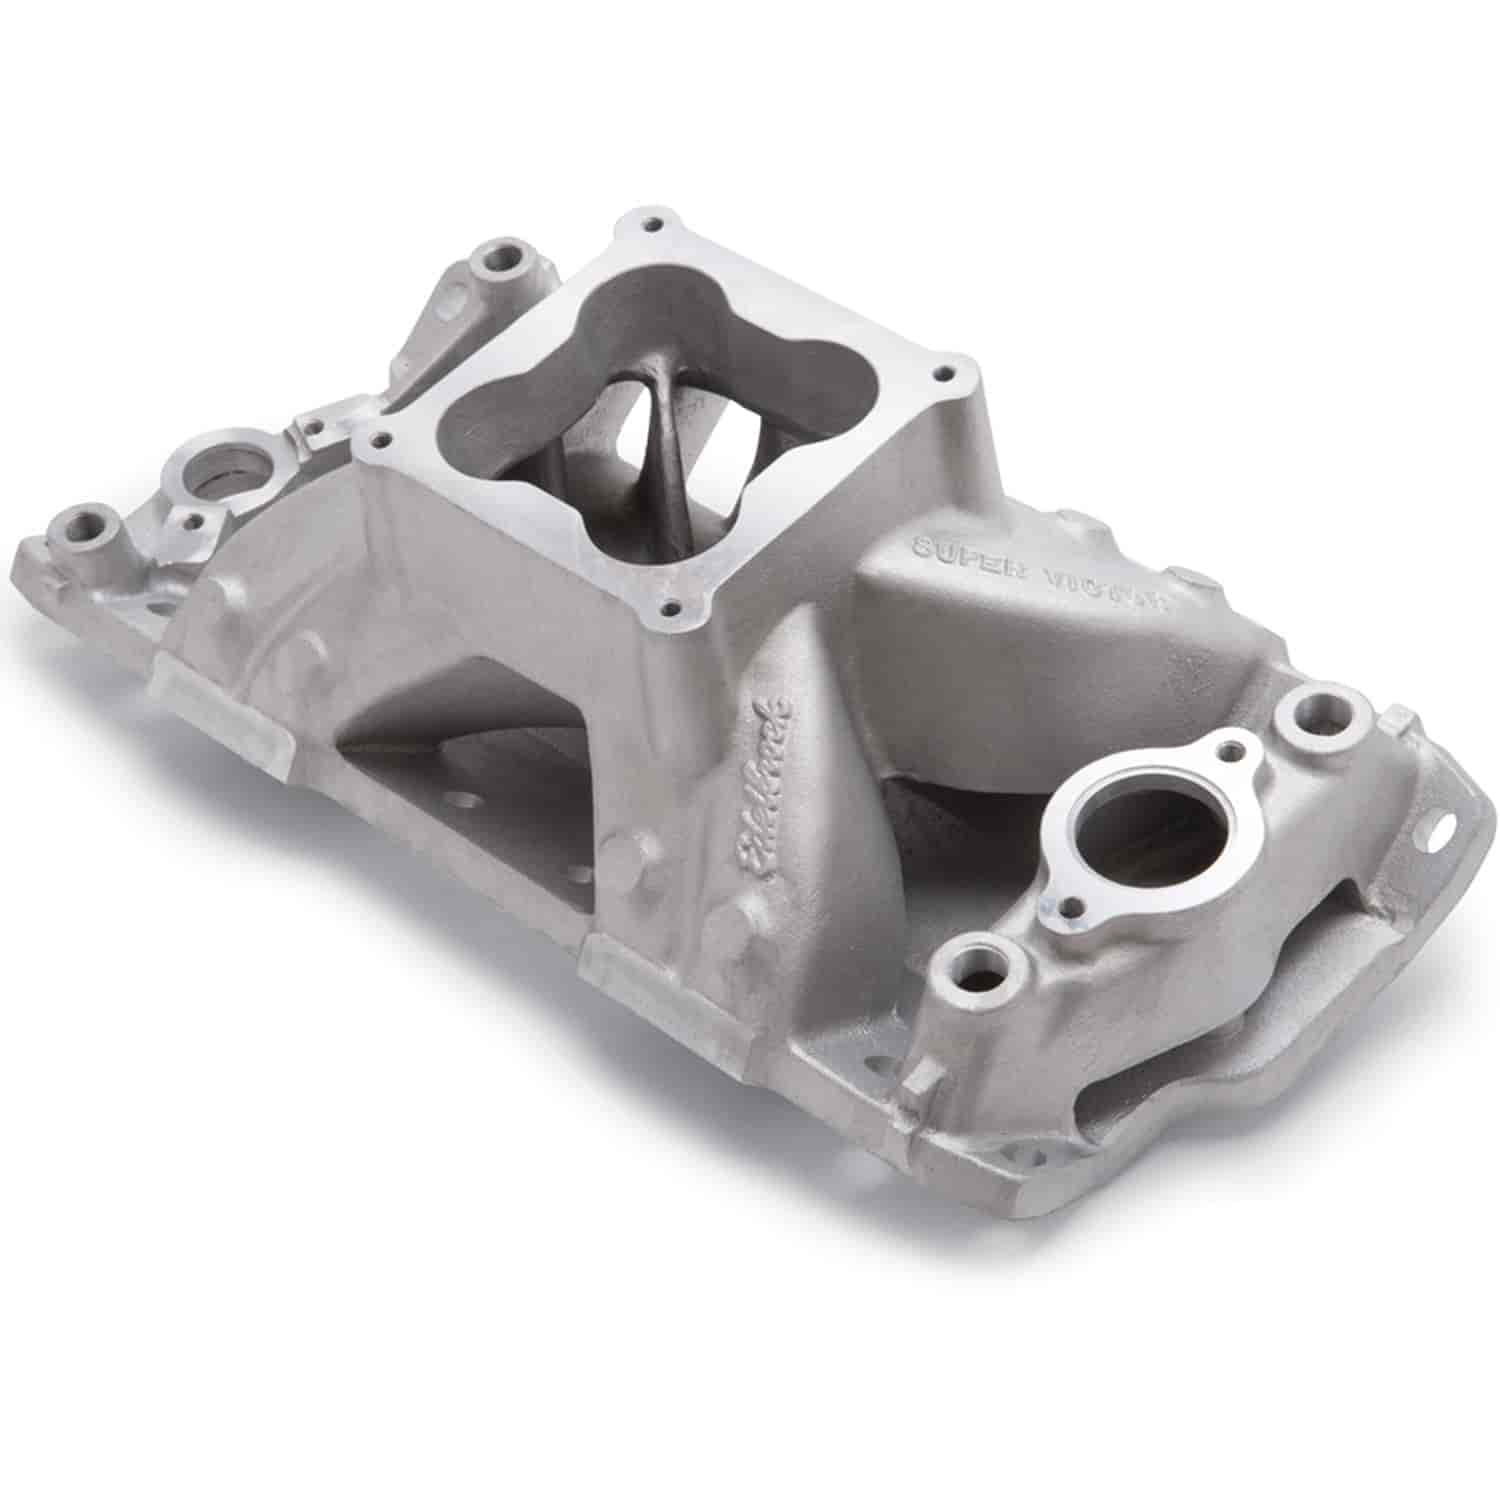 Super Victor 4500 Intake Manifold Small Block Chevy w/Raised Intake Port Location 23° Cylinder Heads